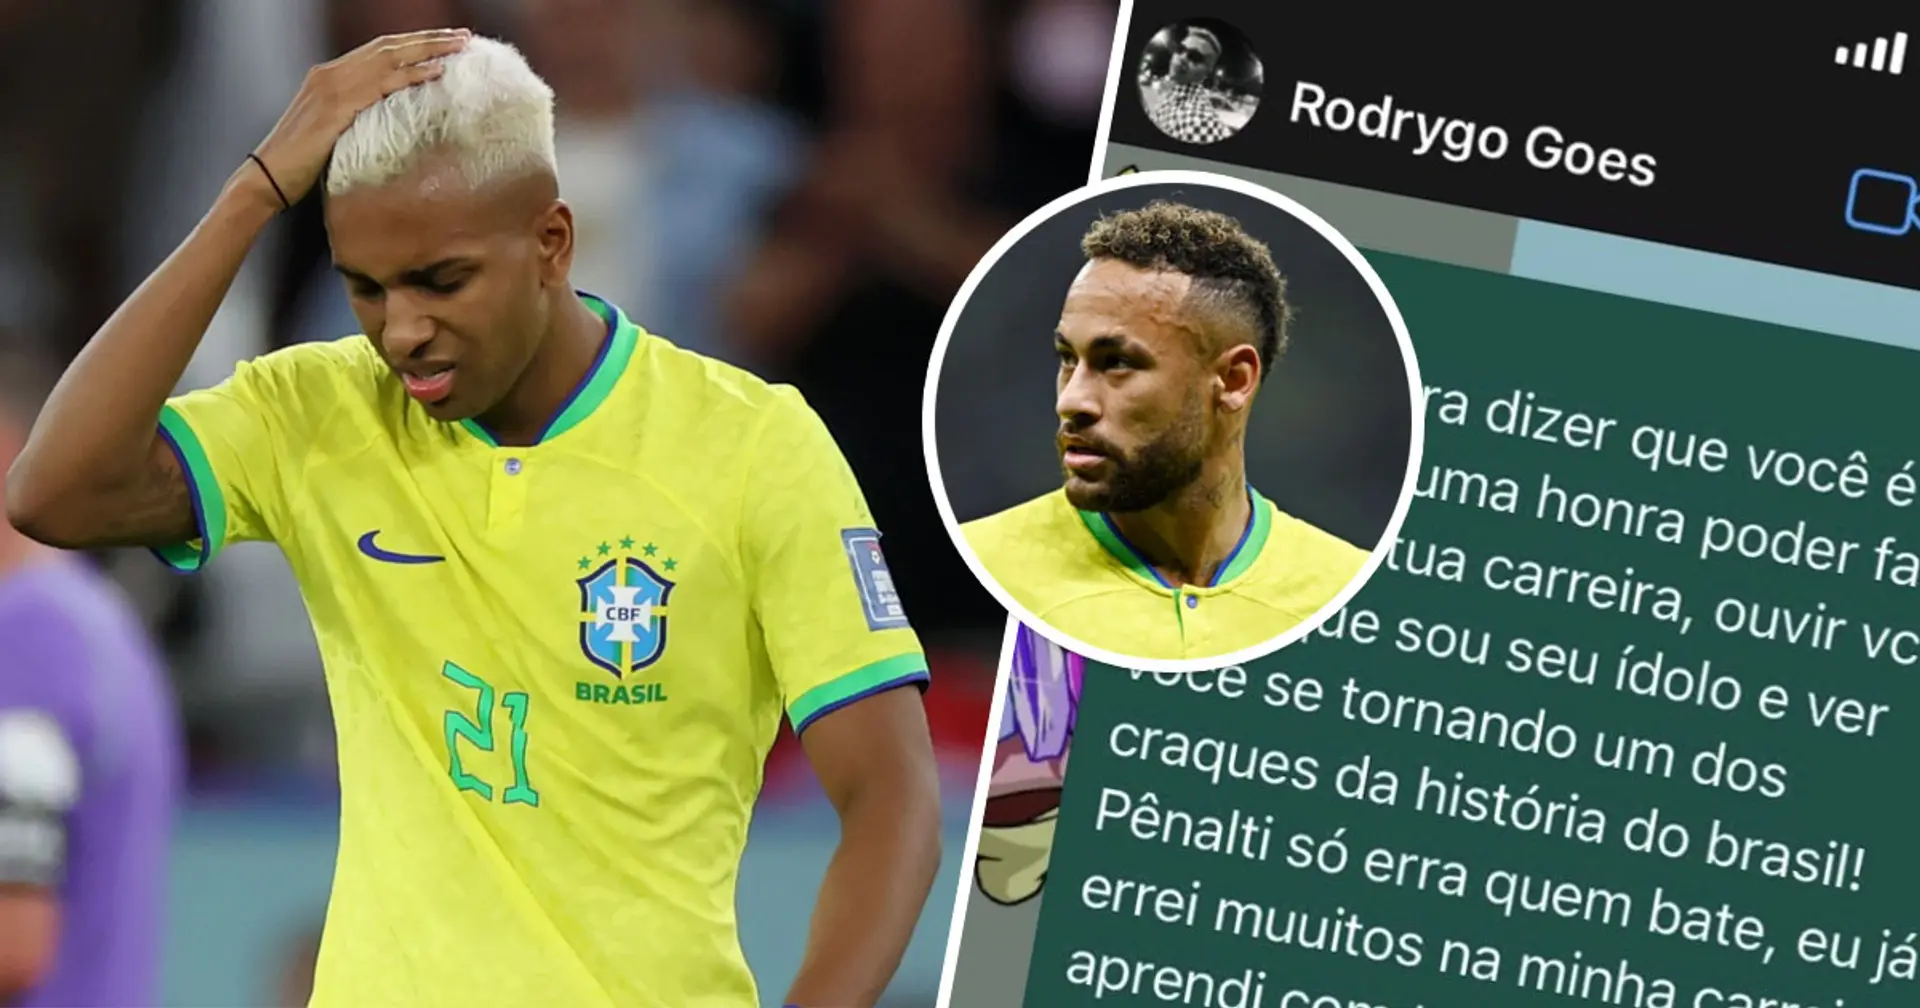 'Criticism will make you stronger': Neymar reveals his message for Rodrygo after youngster's crucial penalty miss v Croatia